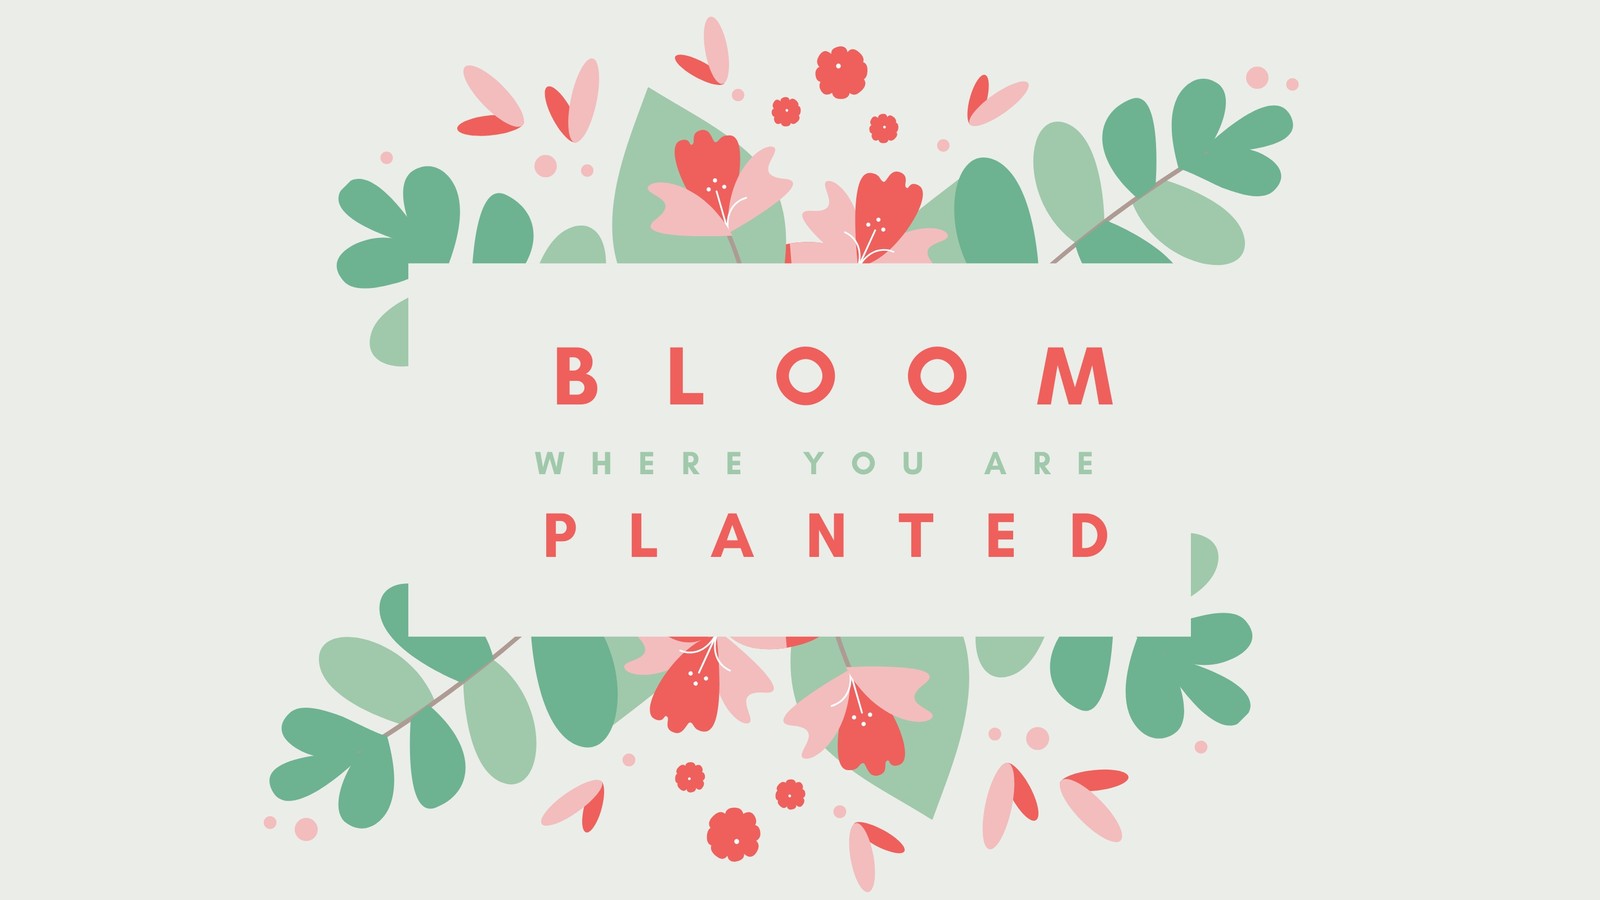 Page 9 - Free and customizable floral desktop wallpaper templates | Canva